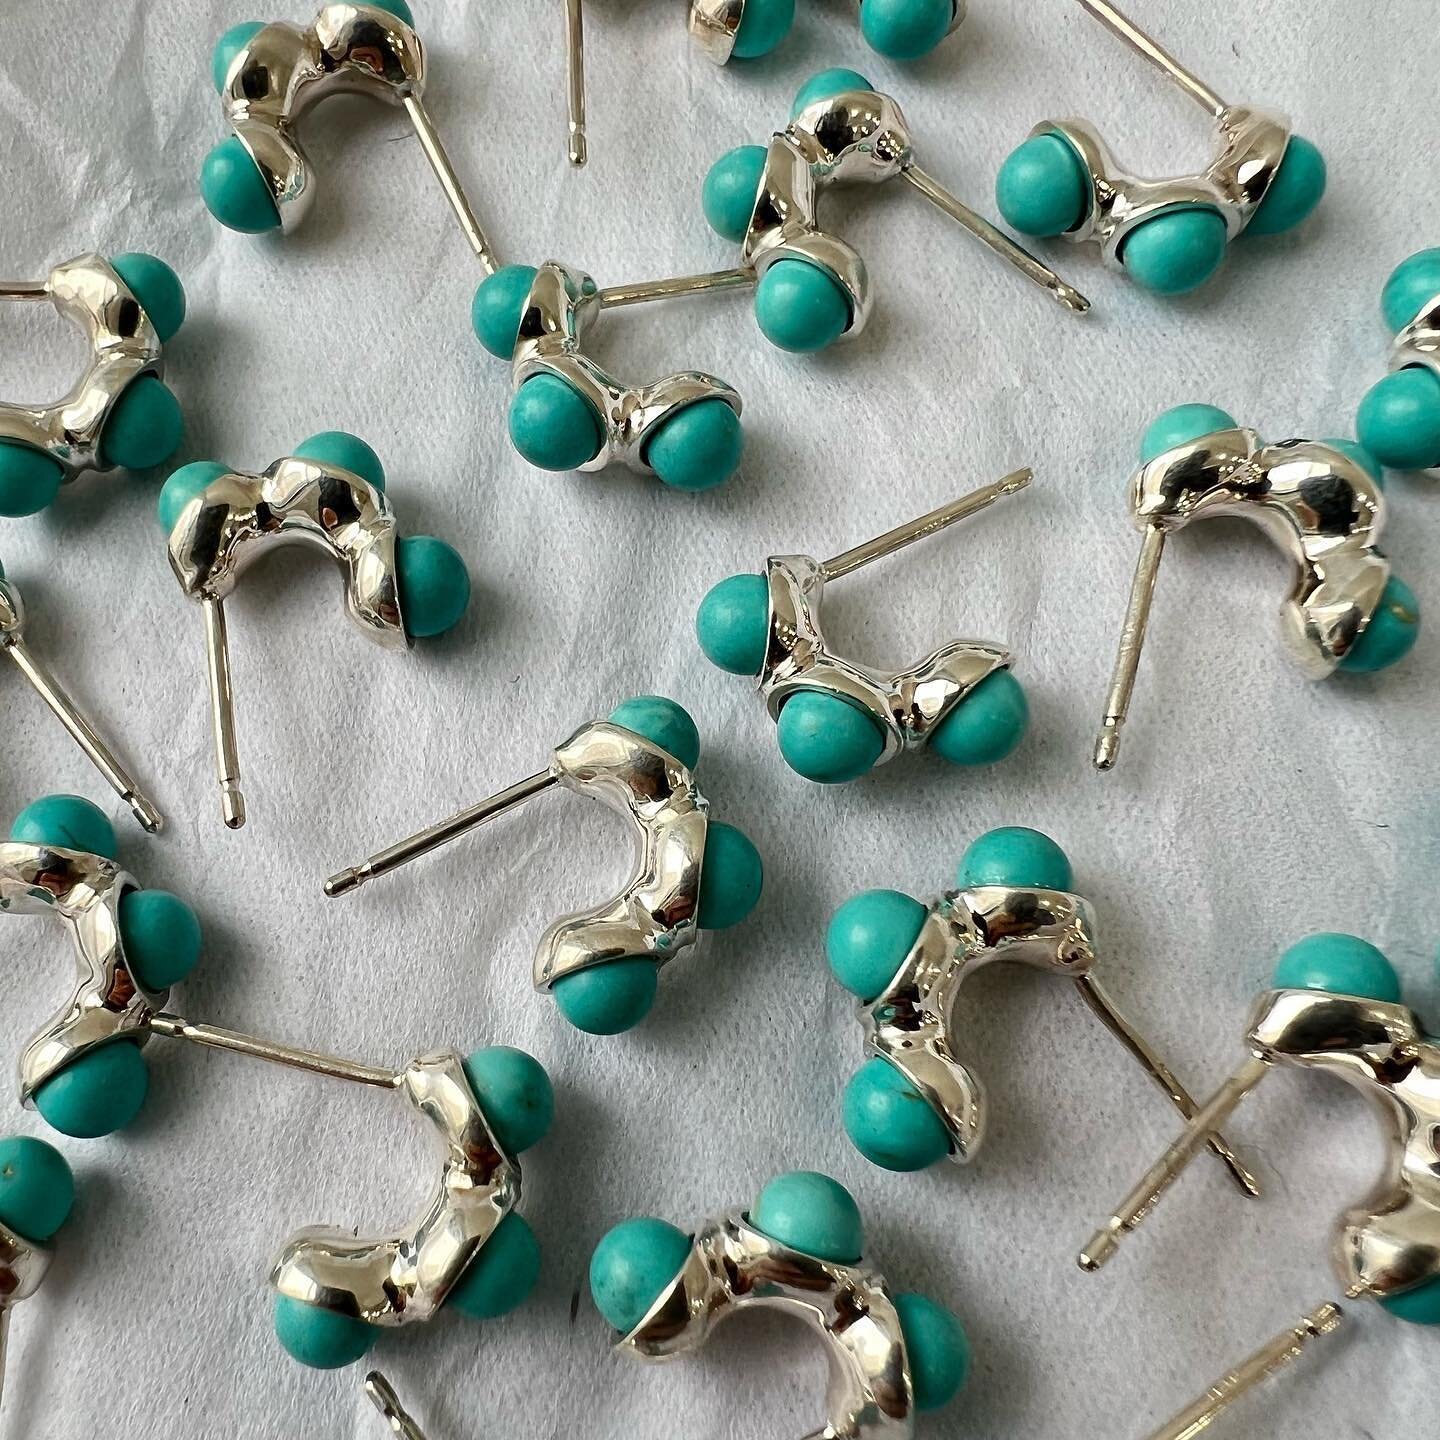 Syan earrings with Turquoise